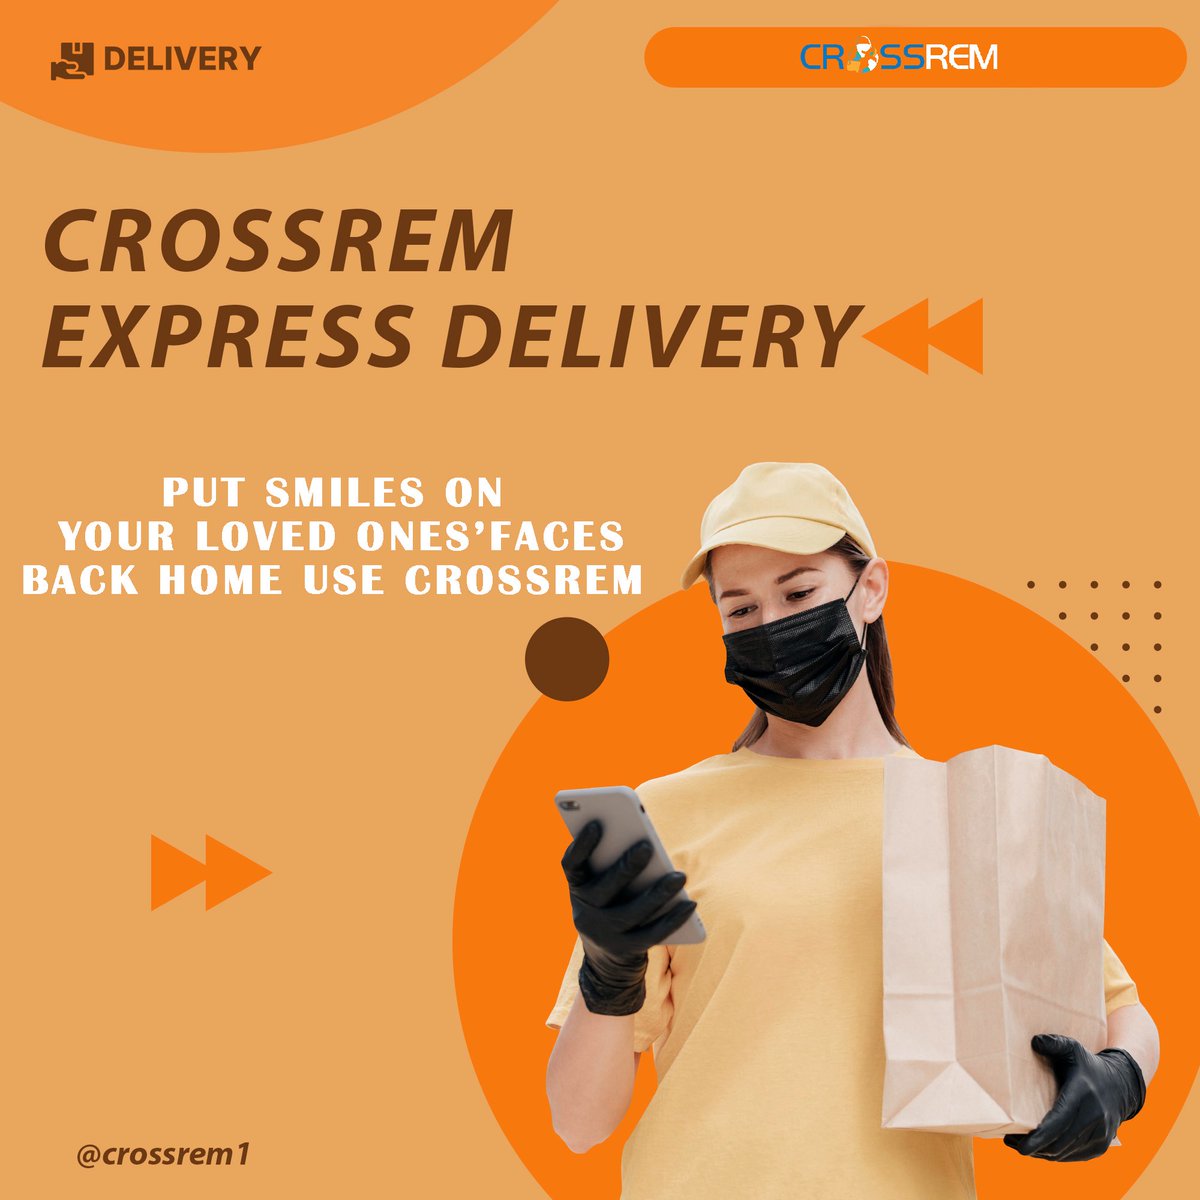 Increase sales by connecting with people in the diaspora- Become a vendor on CrossRem App 
.
.
.
.
.
.
.
#CrossRem
#ecommerce
#remittance
#online
#mobile
#diaspora
#family
#friends
#basicneeds
#worldclass
#paymentprocessing
#transaction